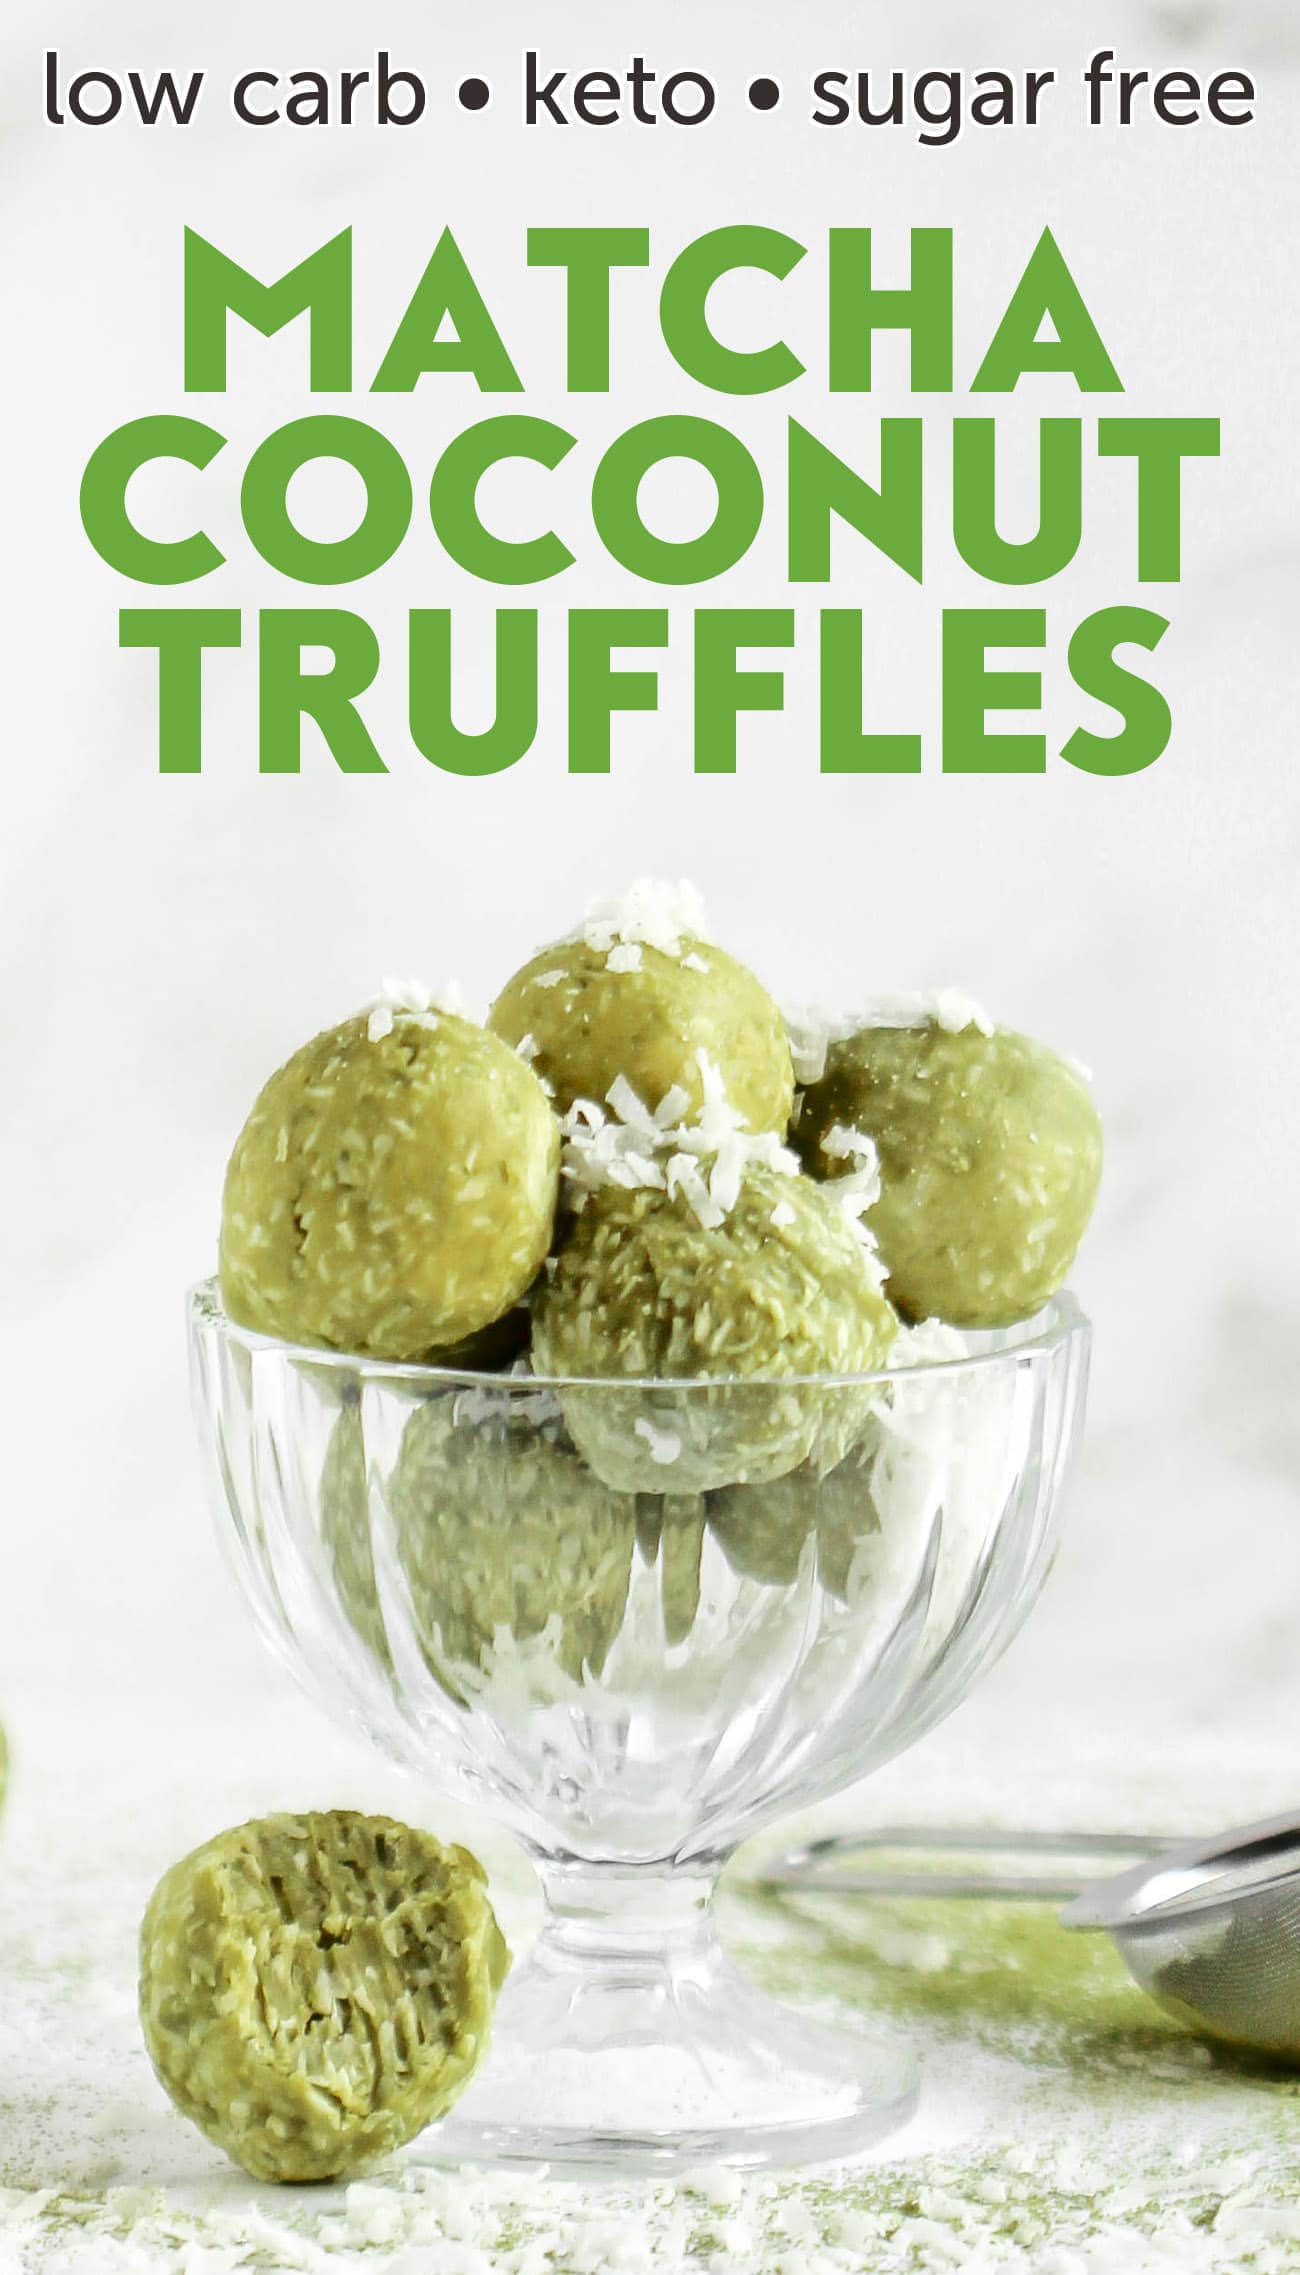 Easy, no-bake, 6-ingredient Matcha Coconut Truffles made healthy! They're rich and sweet yet made without butter, heavy cream, and sugar. They're keto-friendly, low carb, sugar free, and gluten free too!